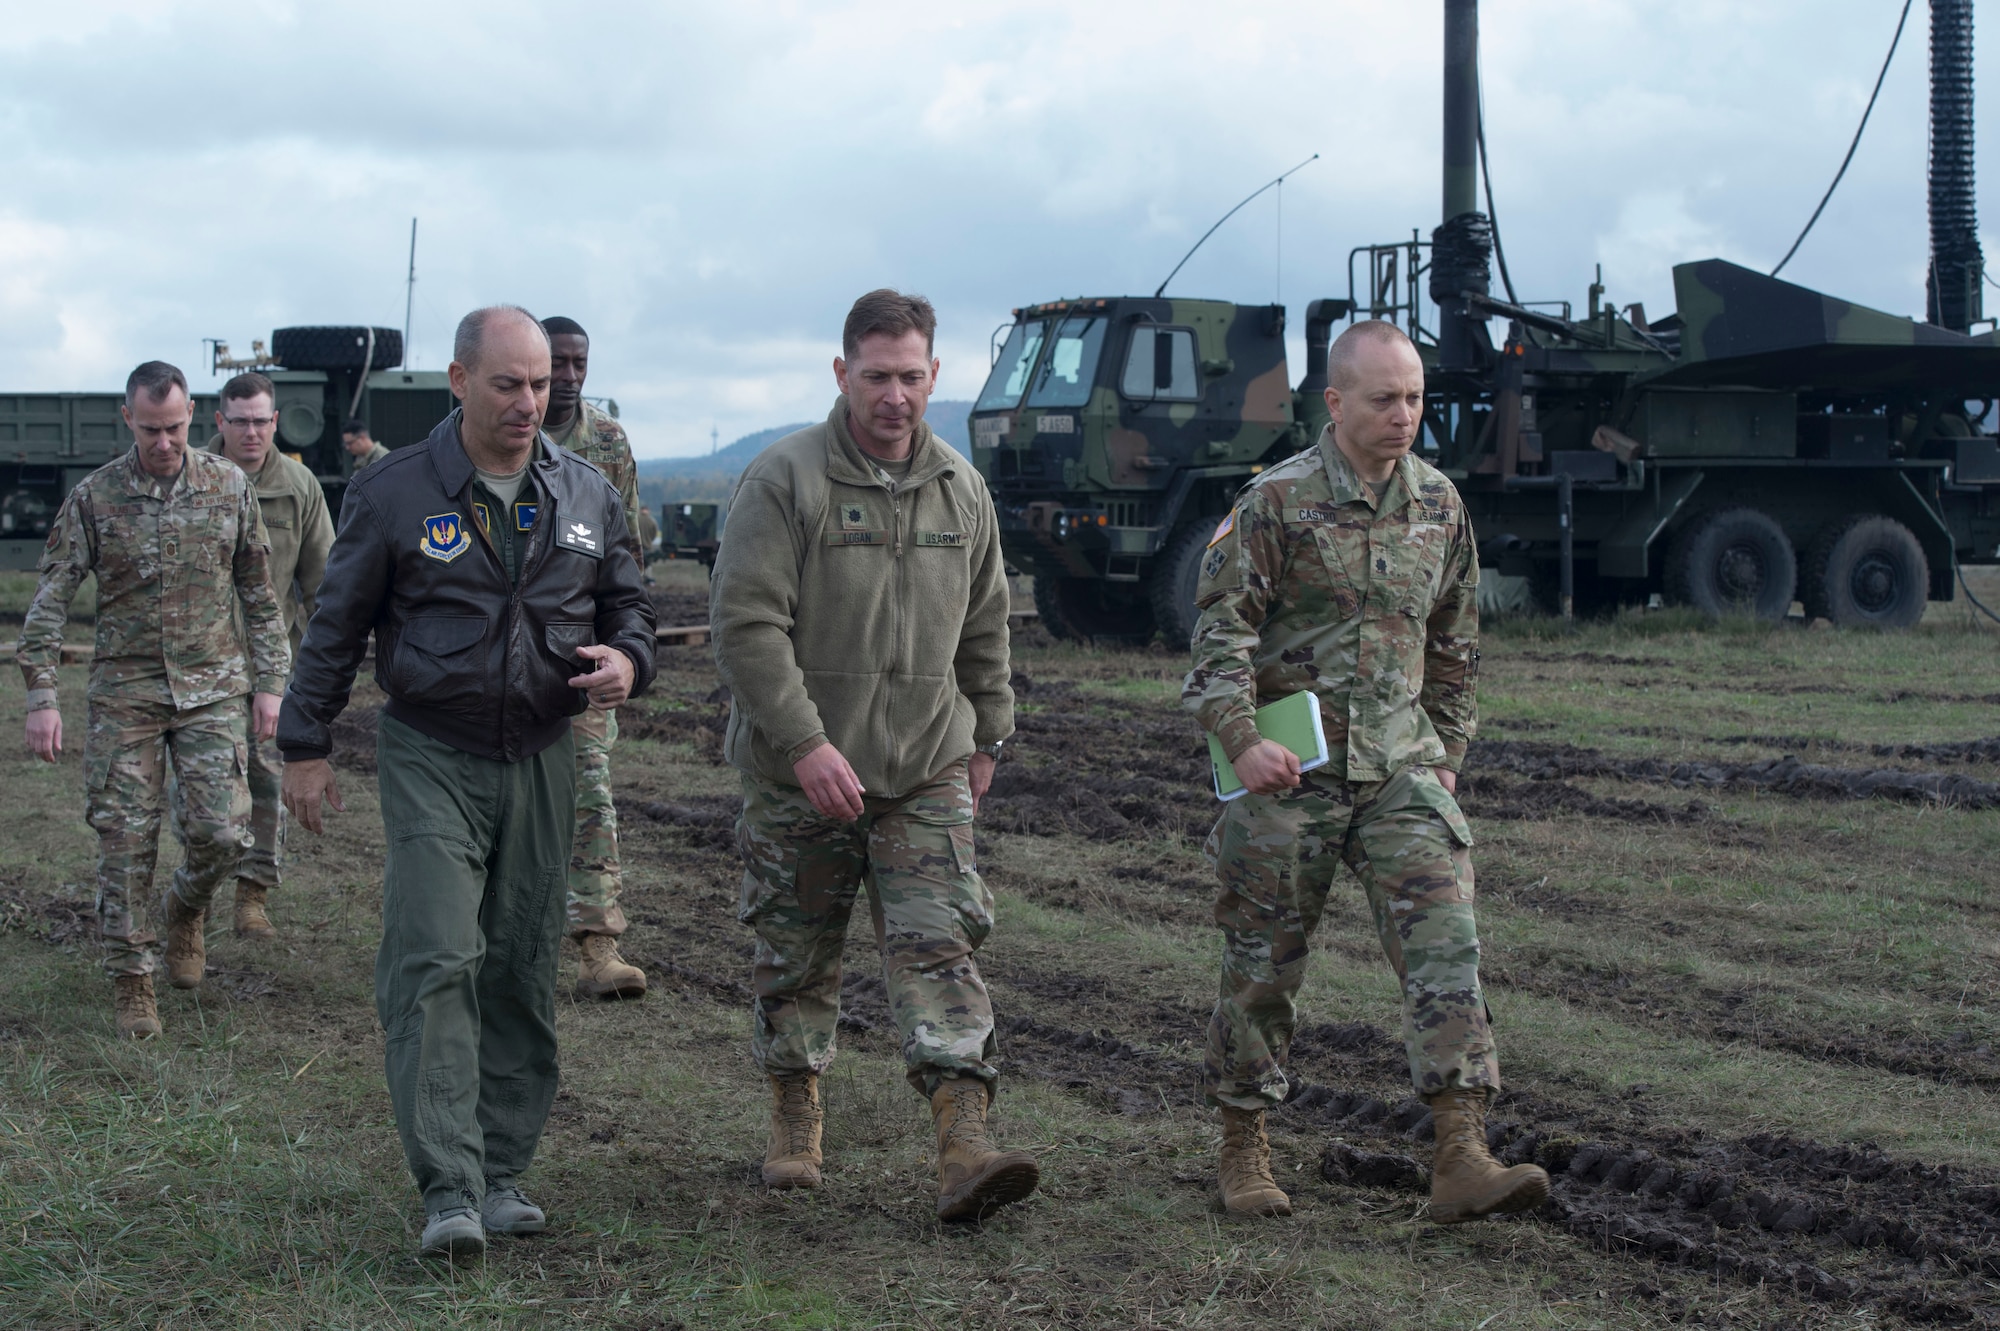 Gen. Jeff Harrigian, U.S. Air Forces in Europe and Air Forces Africa commander, discusses the Patriot Missile System with U.S. Army Lt. Col. Justin Logan, 5th Battalion, 7th Air Defense Artillery Regiment commander, Baumholder, Germany, while at Ramstein Air Base, Germany, Nov. 6, 2019. Soldiers from the 5-7 ADA are completing their Table VIII certification and demonstrating their ability to deploy this defensive capability anytime, anywhere. (U.S. Air Force photo by Tech. Sgt Stephen Ocenosak)